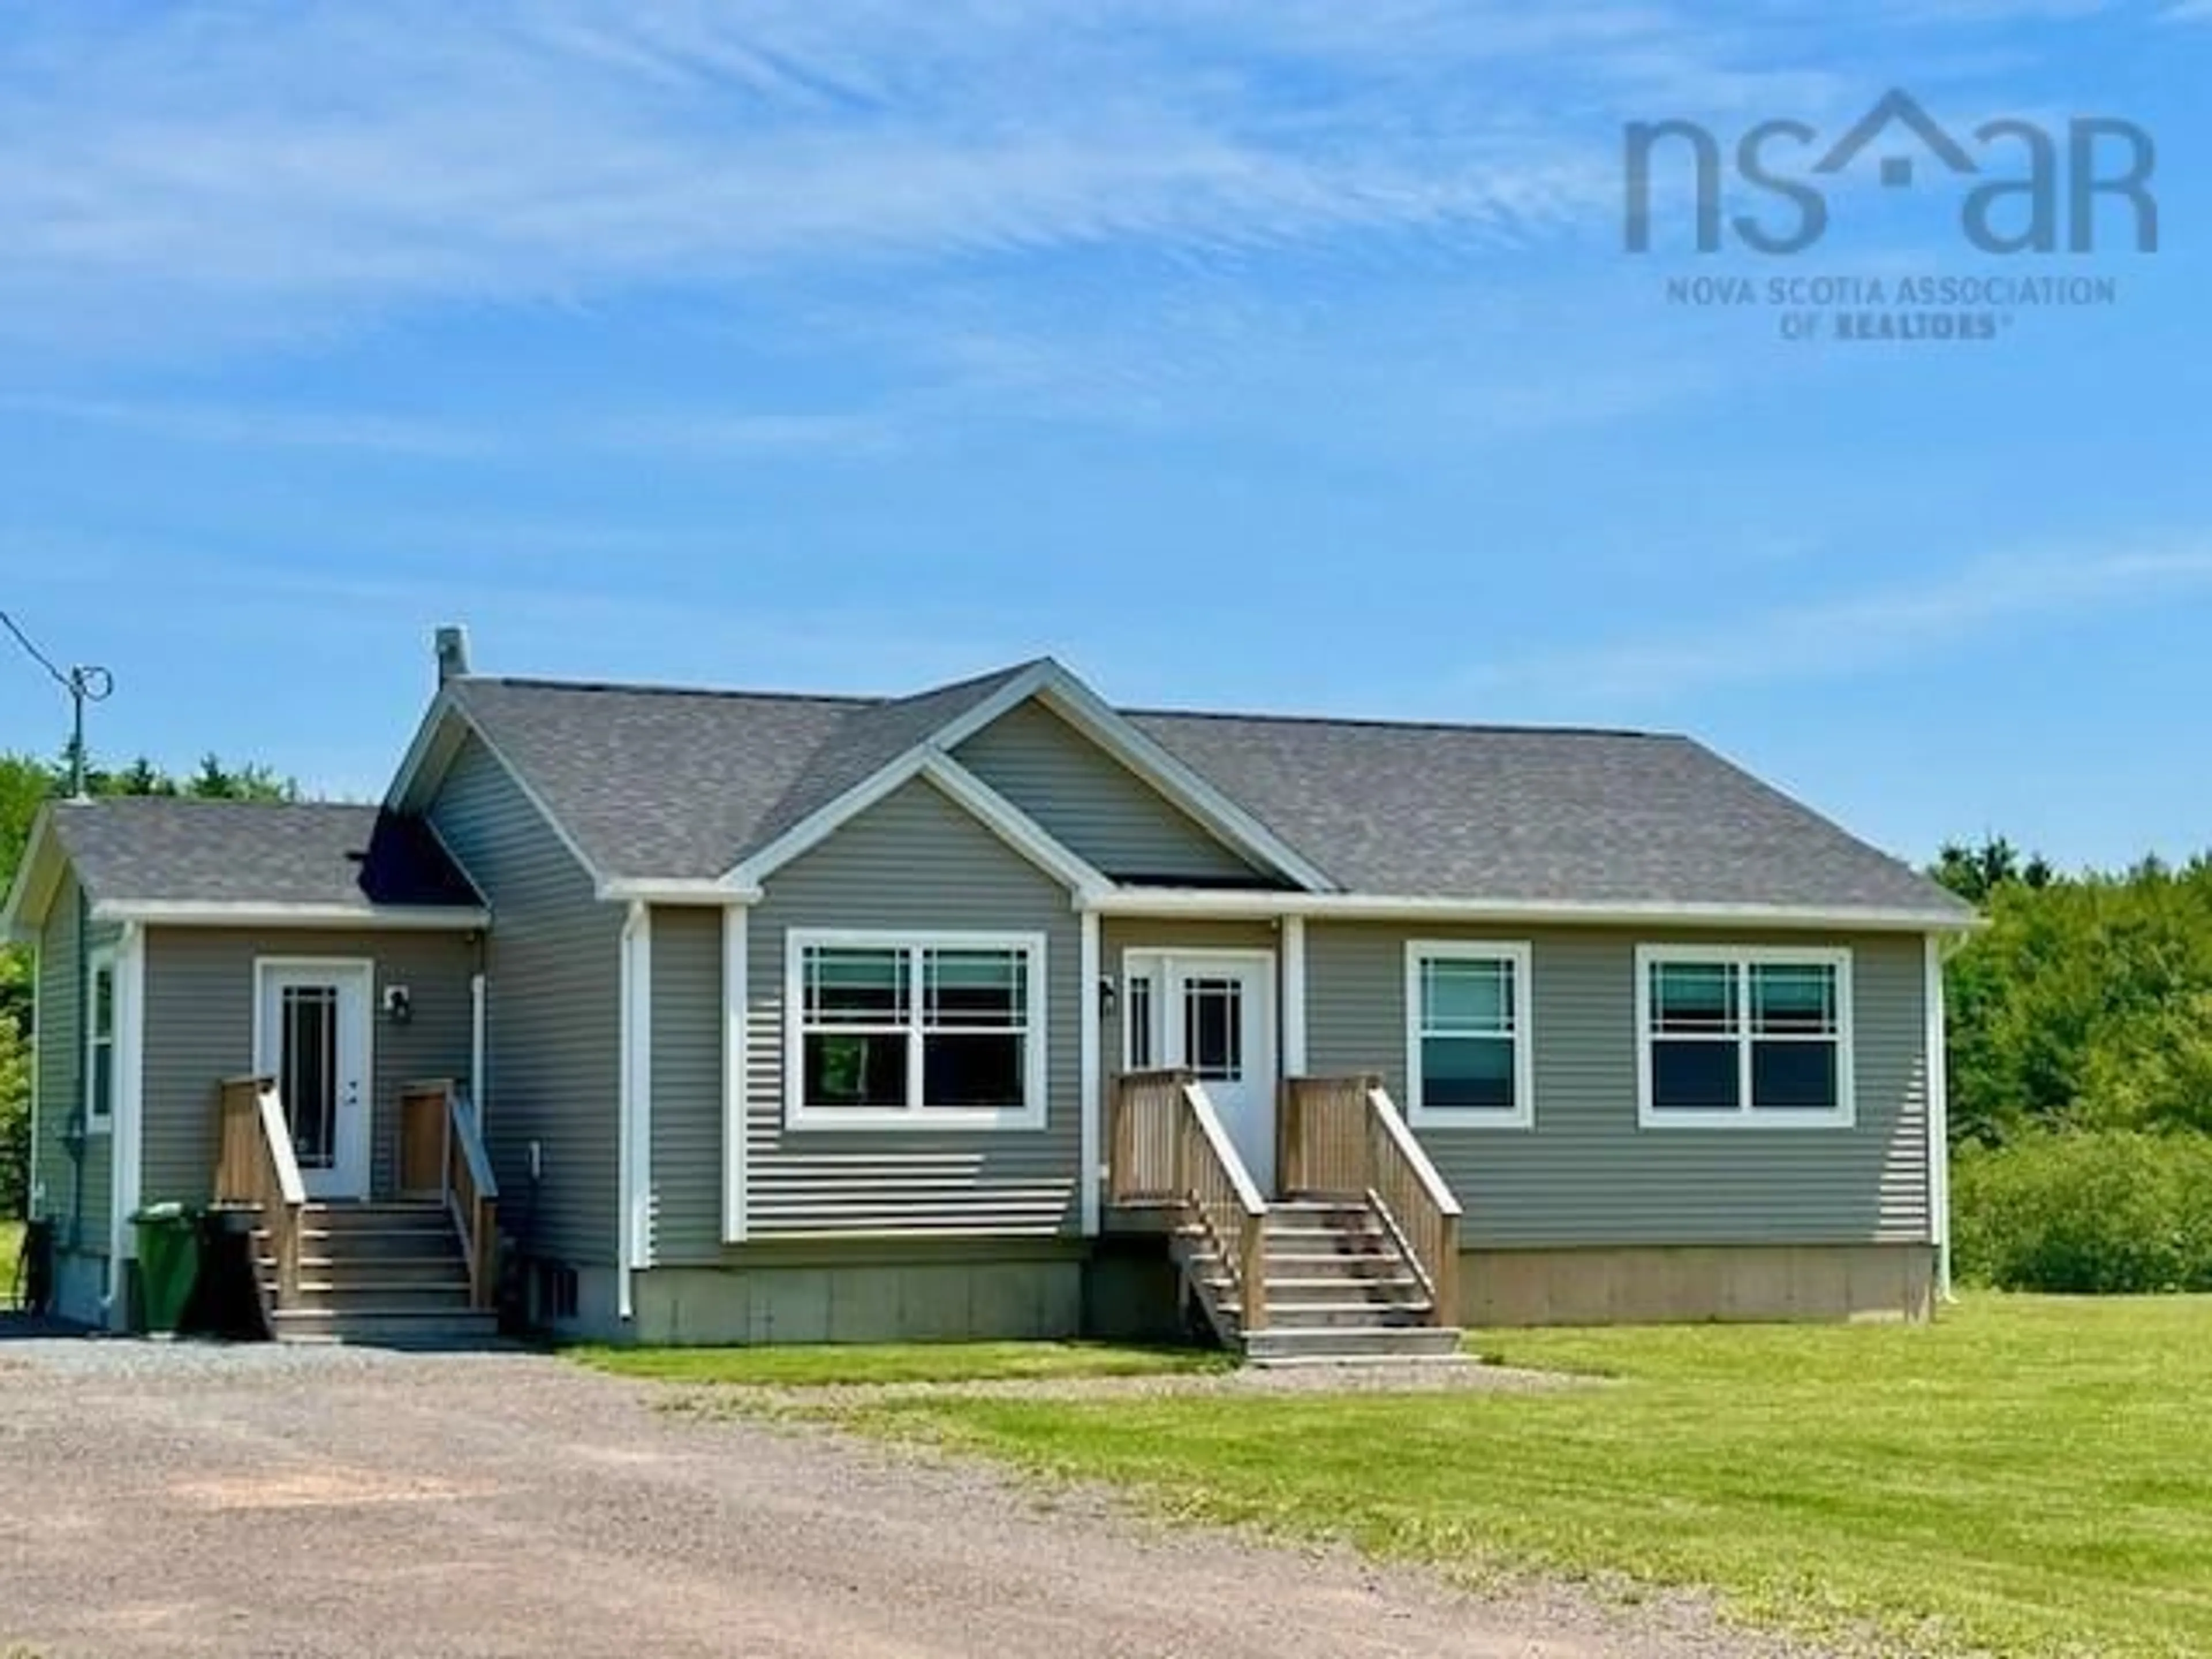 Frontside or backside of a home for 198 Burris Rd, Pleasant Valley Nova Scotia B0N 1C0